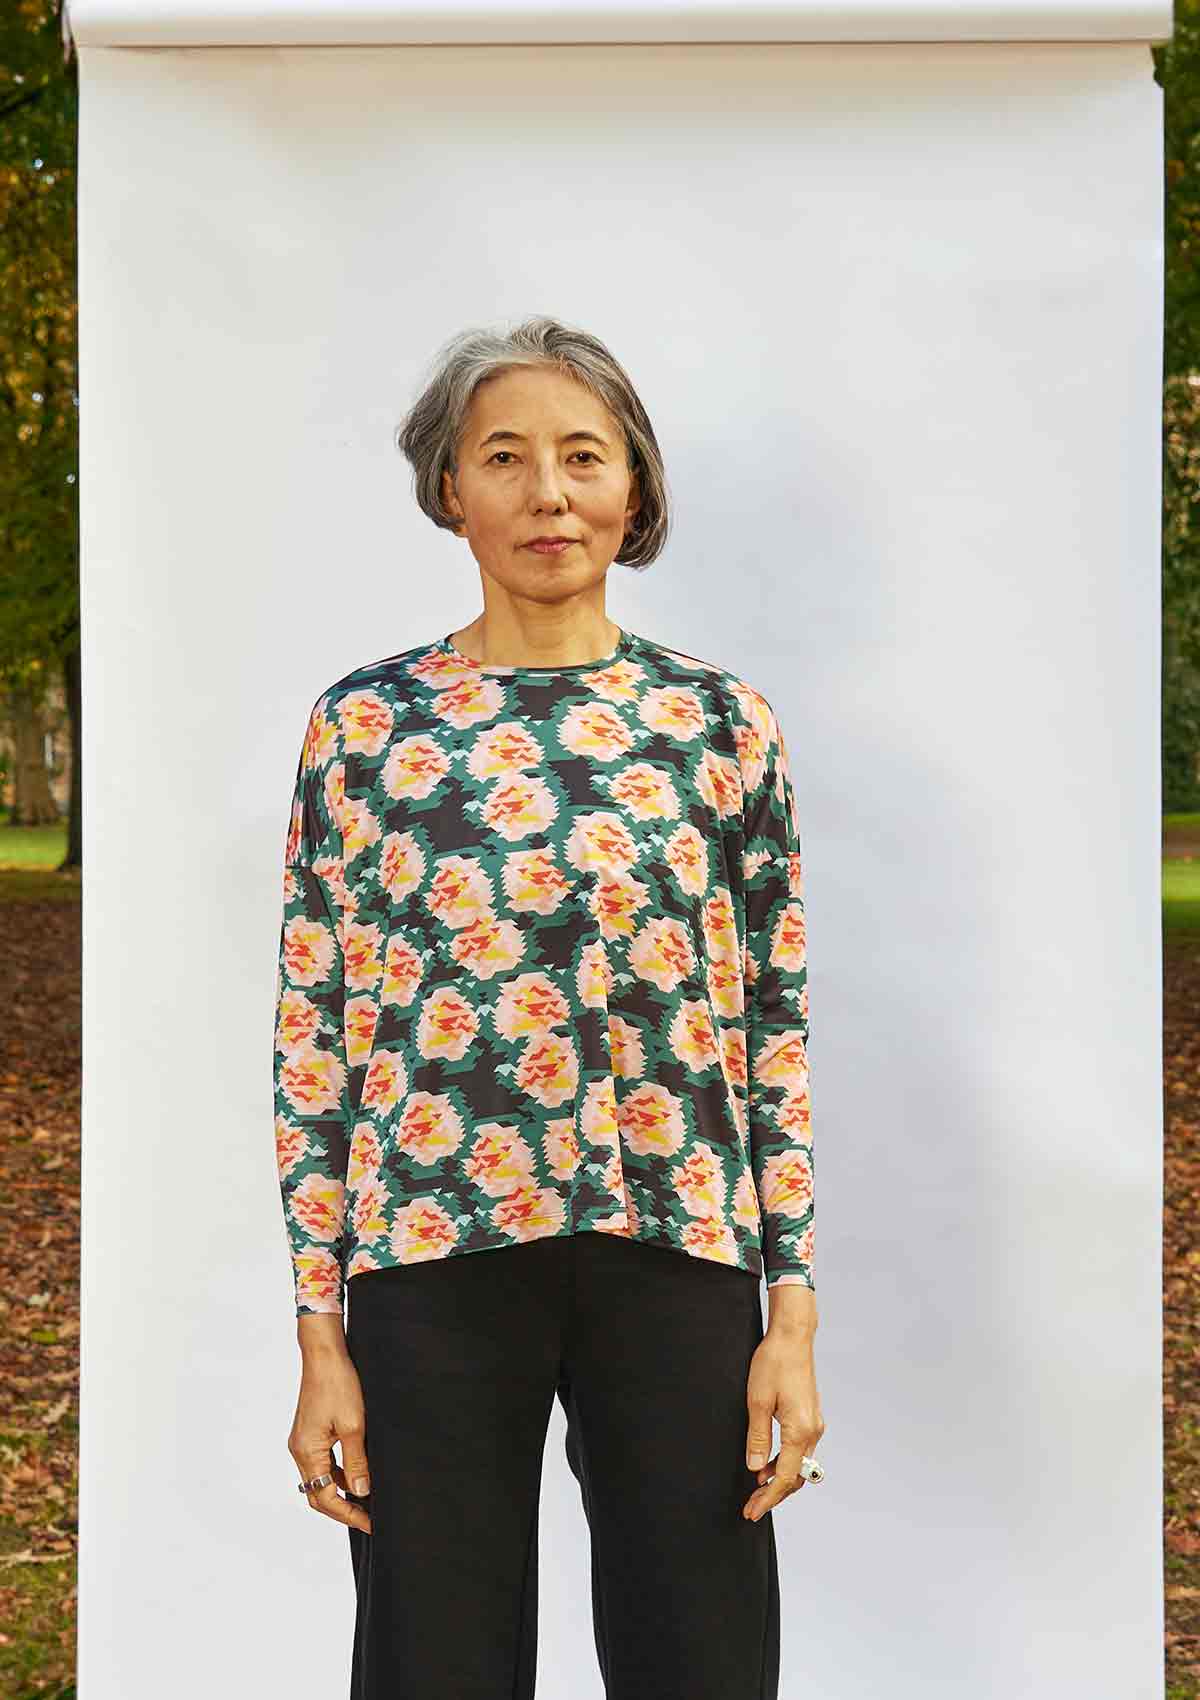 Woman standing face on in front of a white background that is outside in a park. She is wearing the Asmuss Paige Long Sleeve T-shirt in a geometric rose print recycled polyester fabric.  The top is untucked so how the fabric falls can be seen